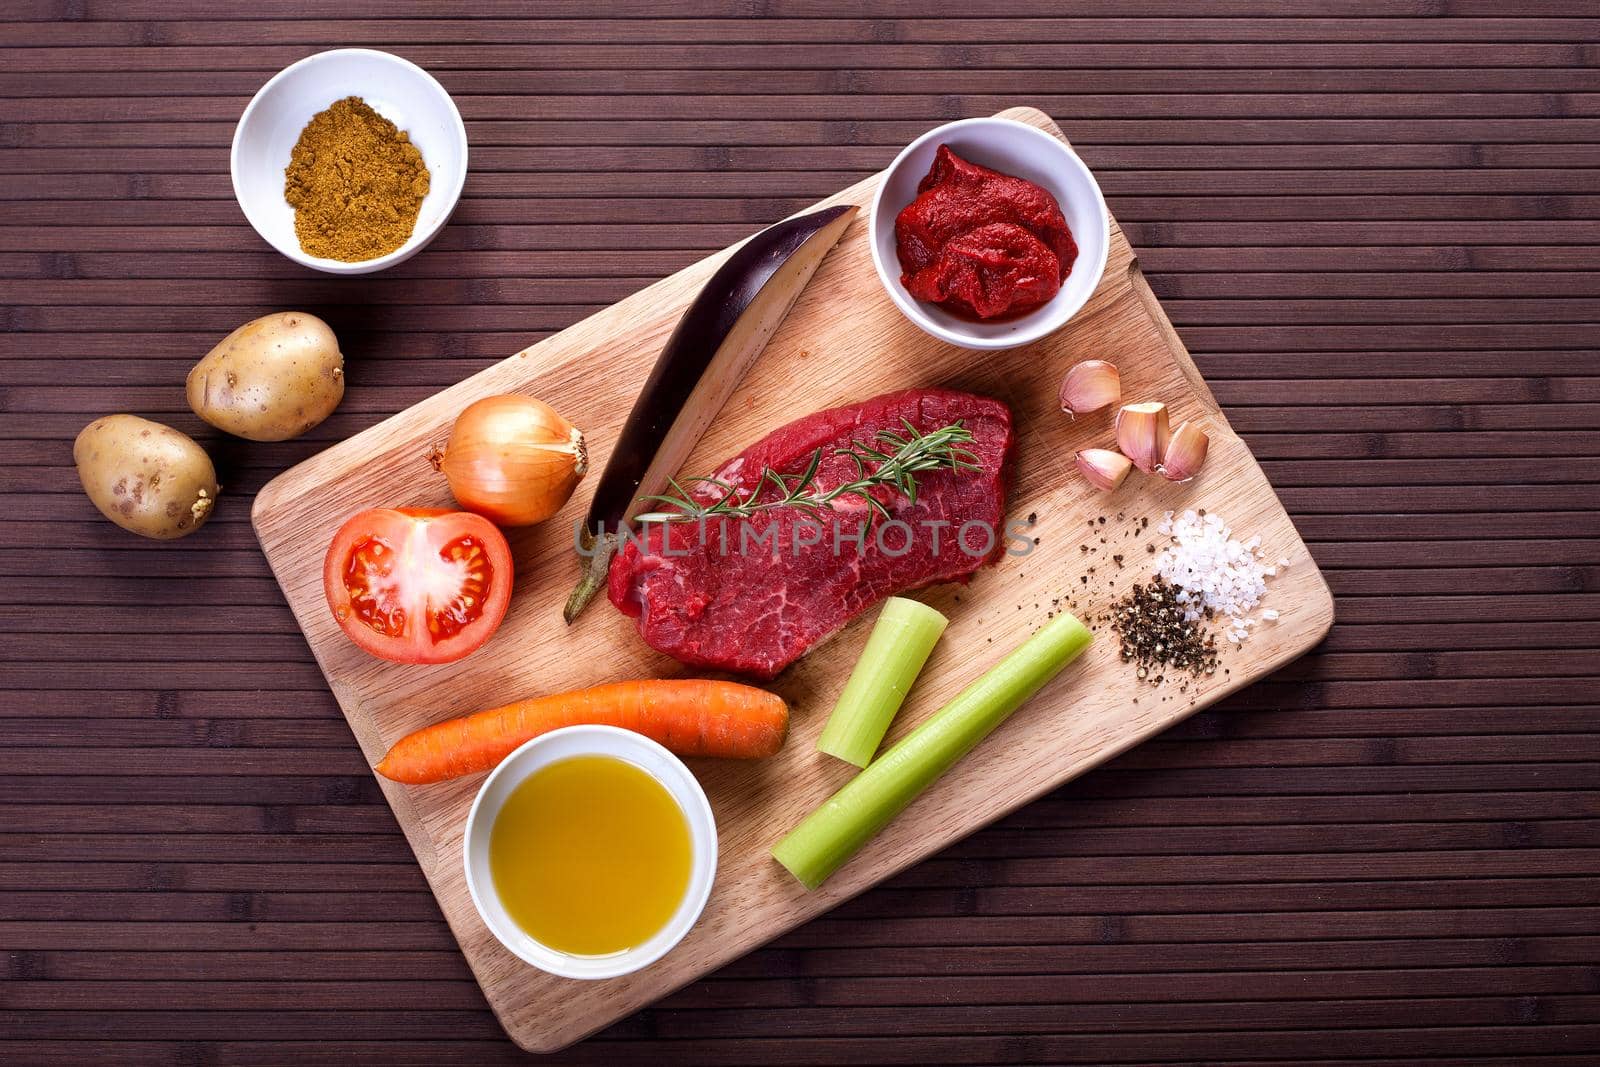 Ingredients for cooking braised veal. Stock image.